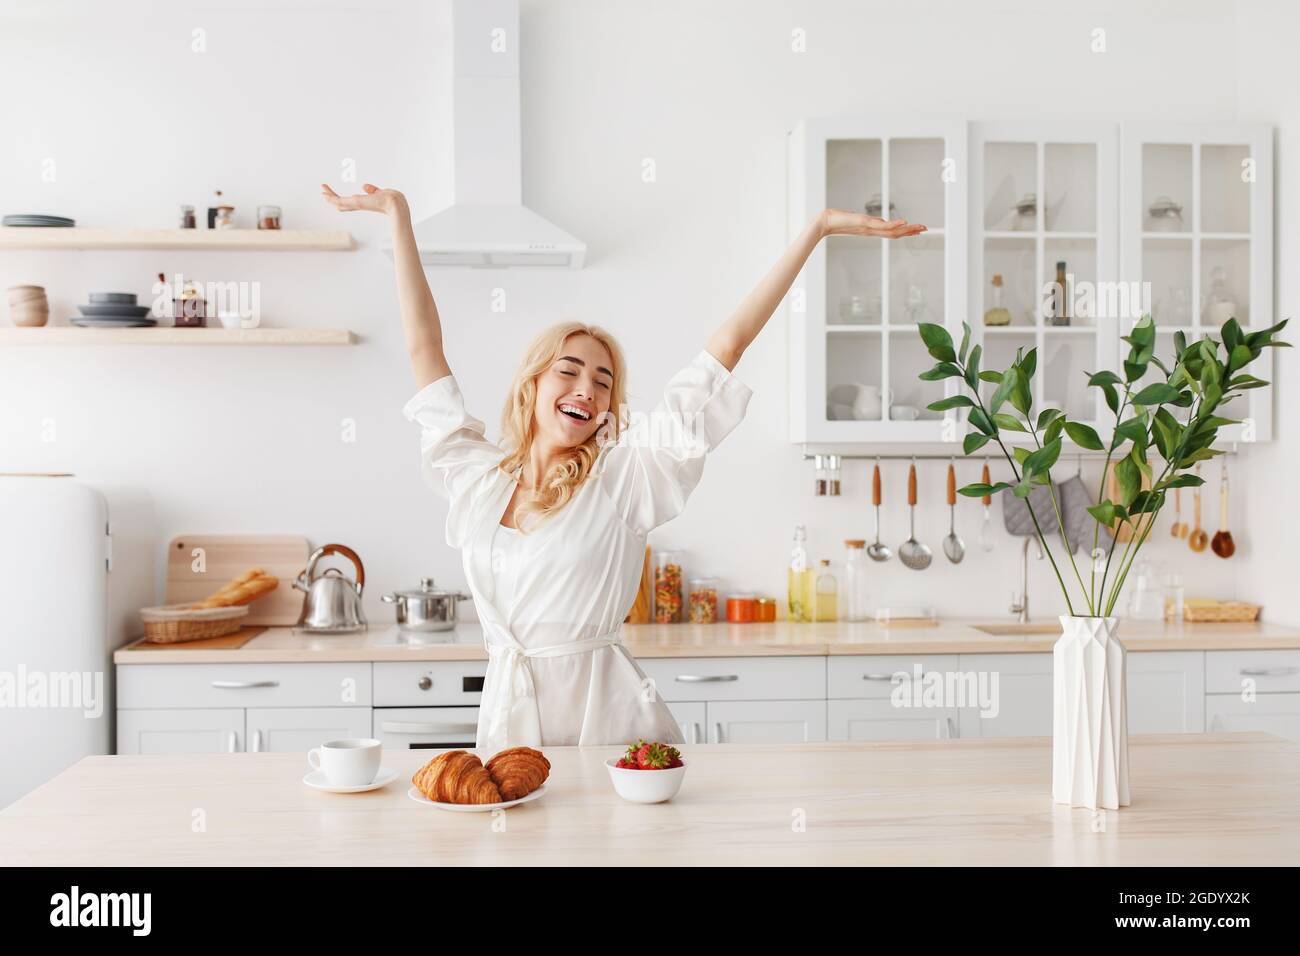 Wonderful morning, emotions of happiness and excellent mood at home alone Stock Photo